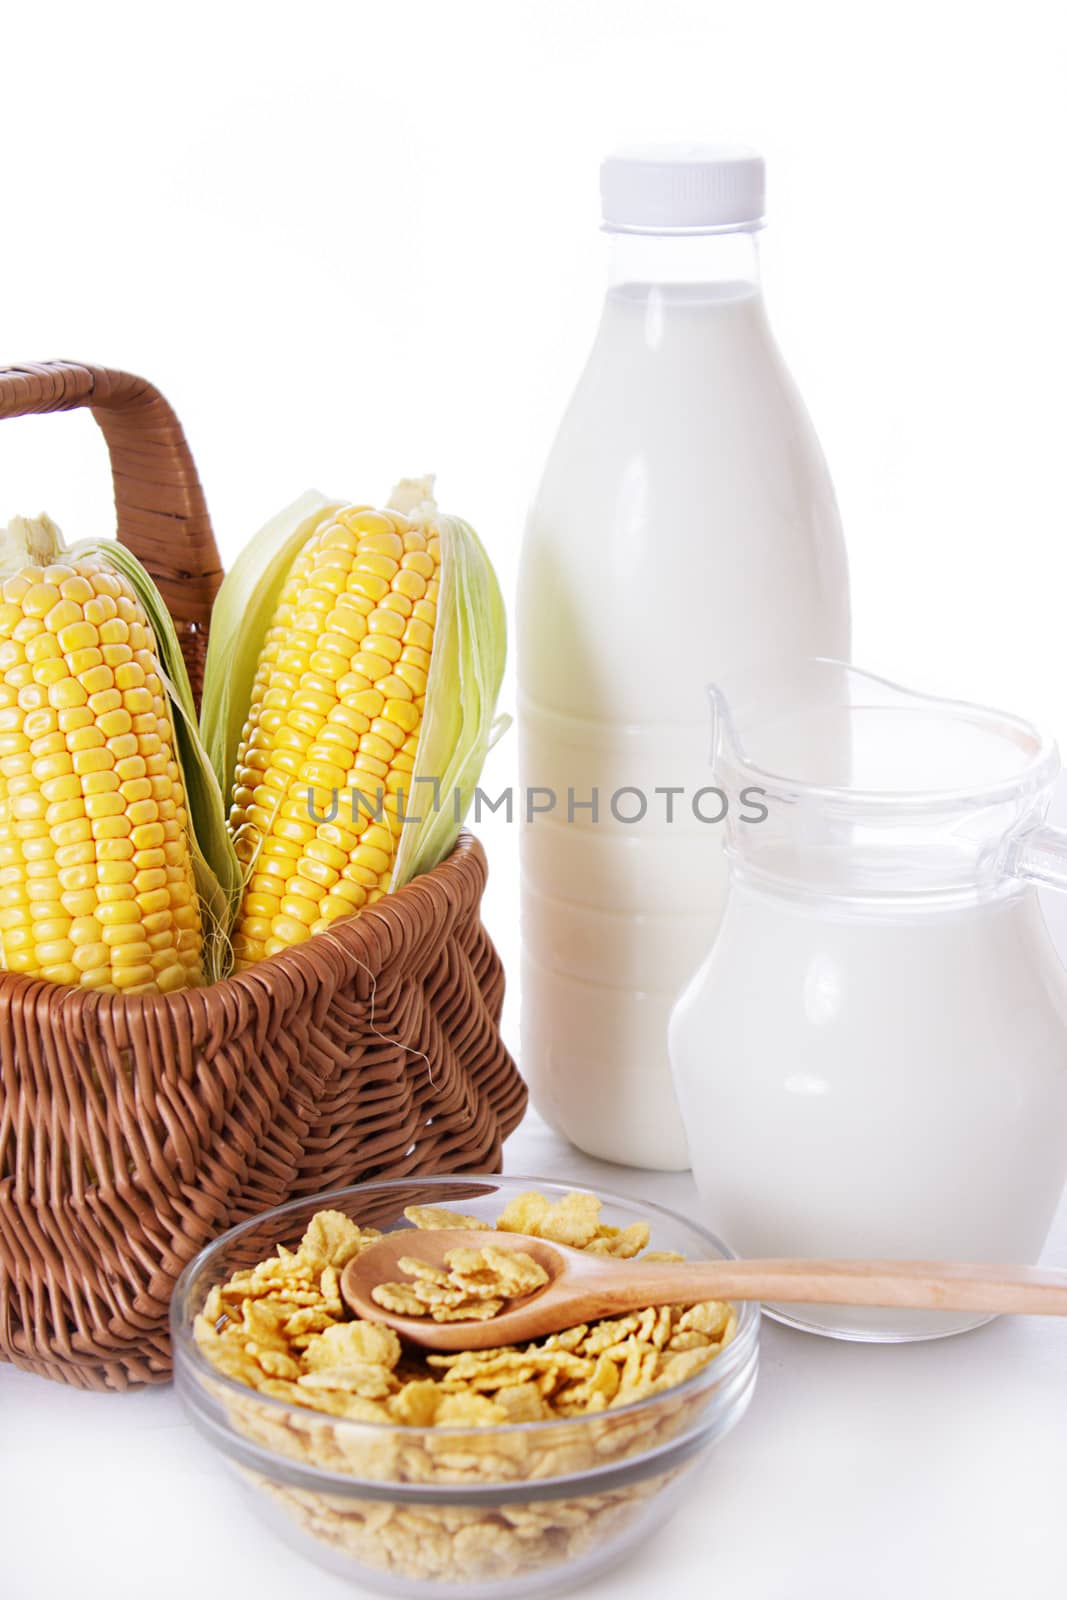 Bottle and jar of milk with corn and flakes isolated on white